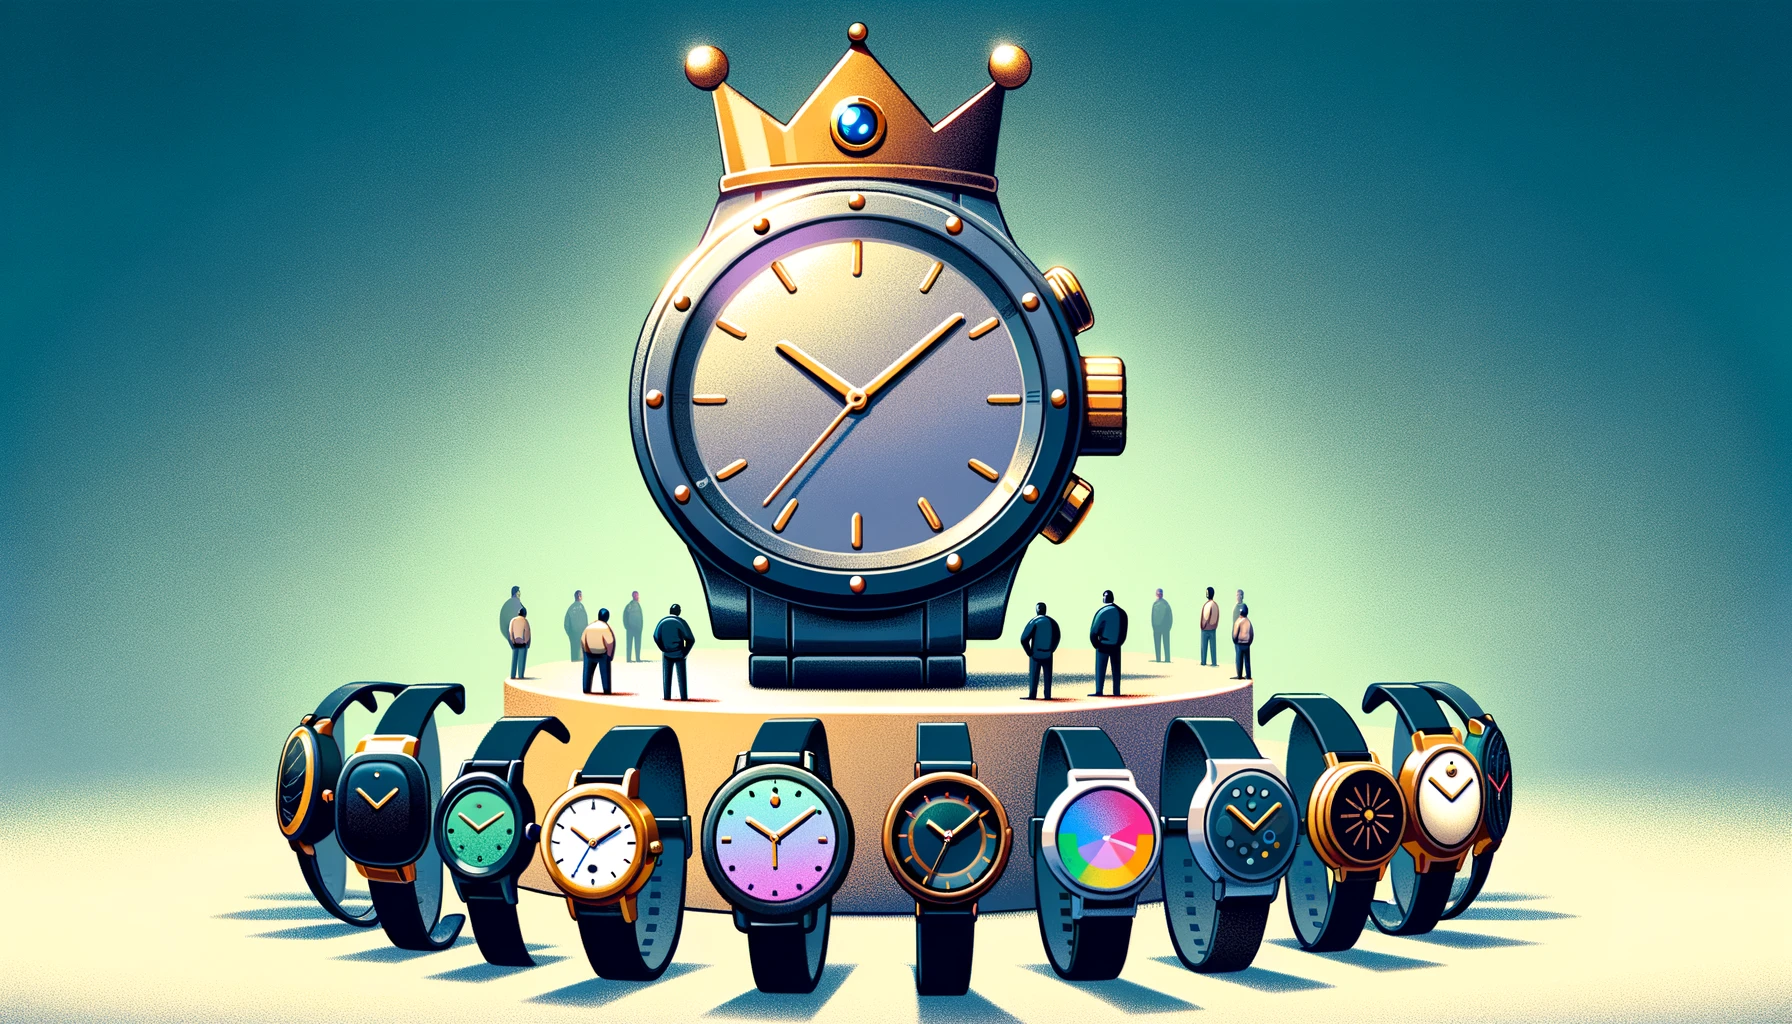 India’s smartwatch sector is undergoing changes with lesser-known brands contesting established giants.